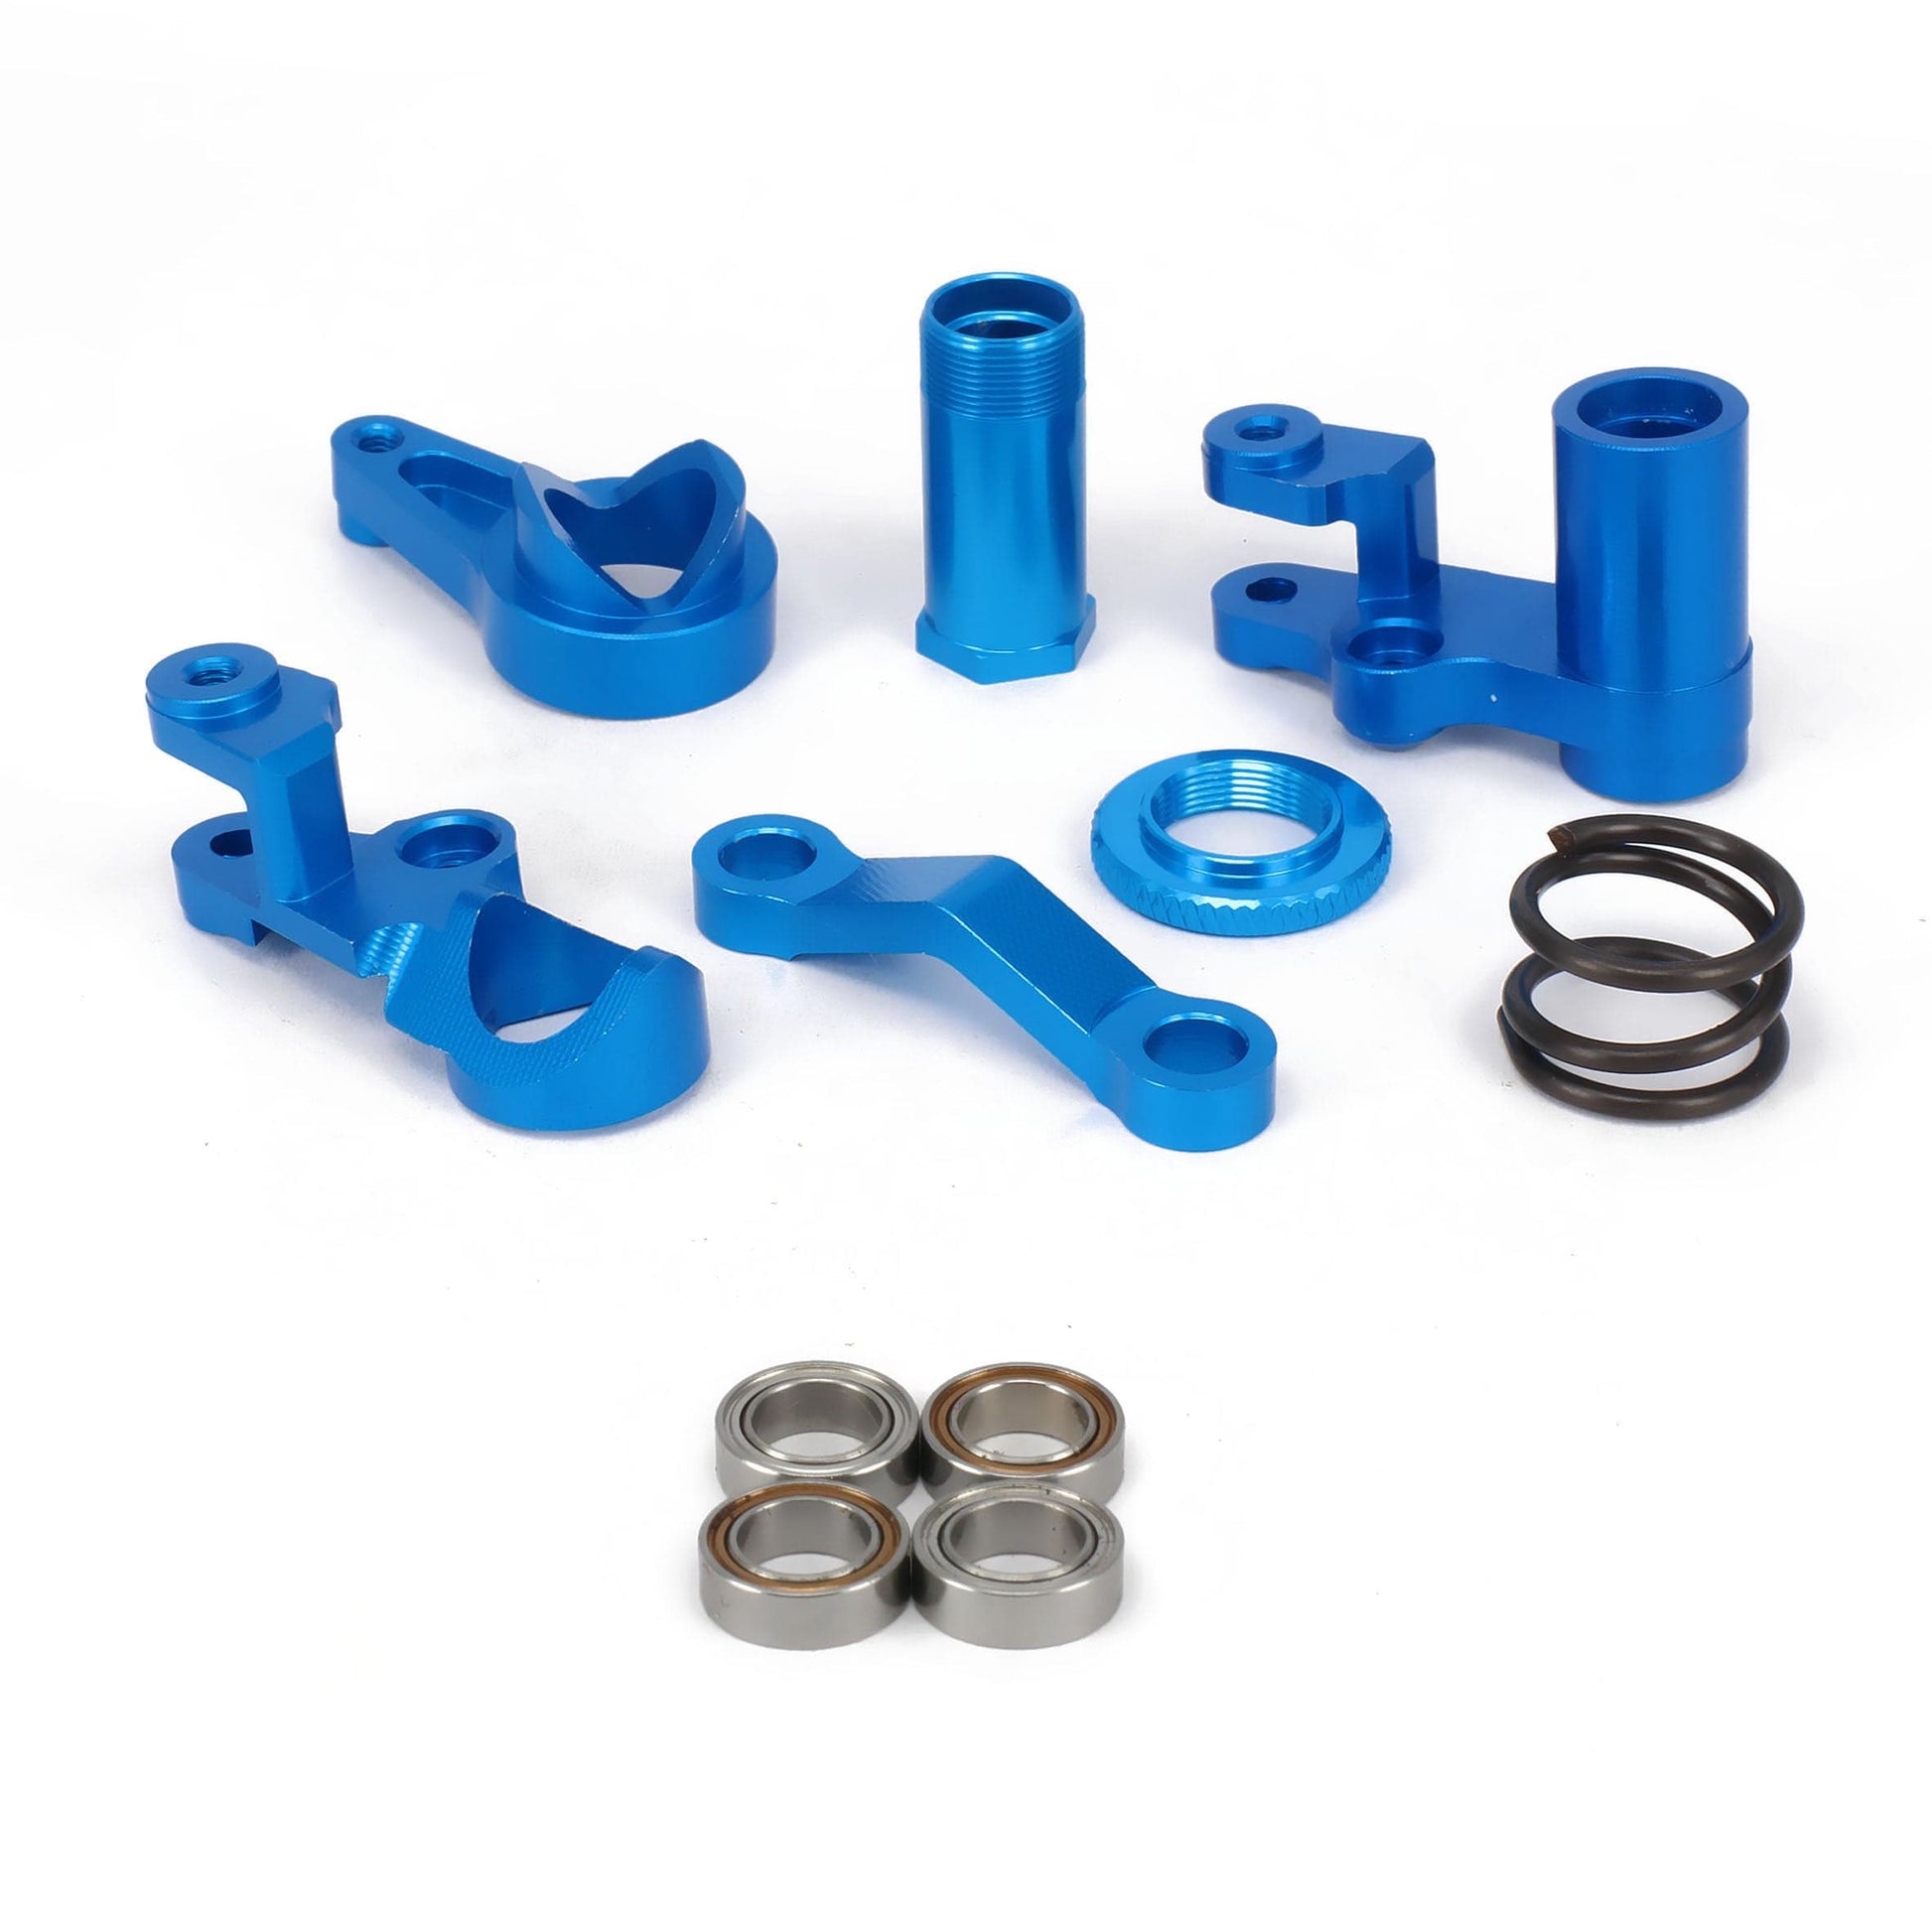 RCAWD TRAXXAS UDR Blue RCAWD Aluminum Steering Bellcranks and Servo Saver Set for Traxxas 1/10 Slash 4x4